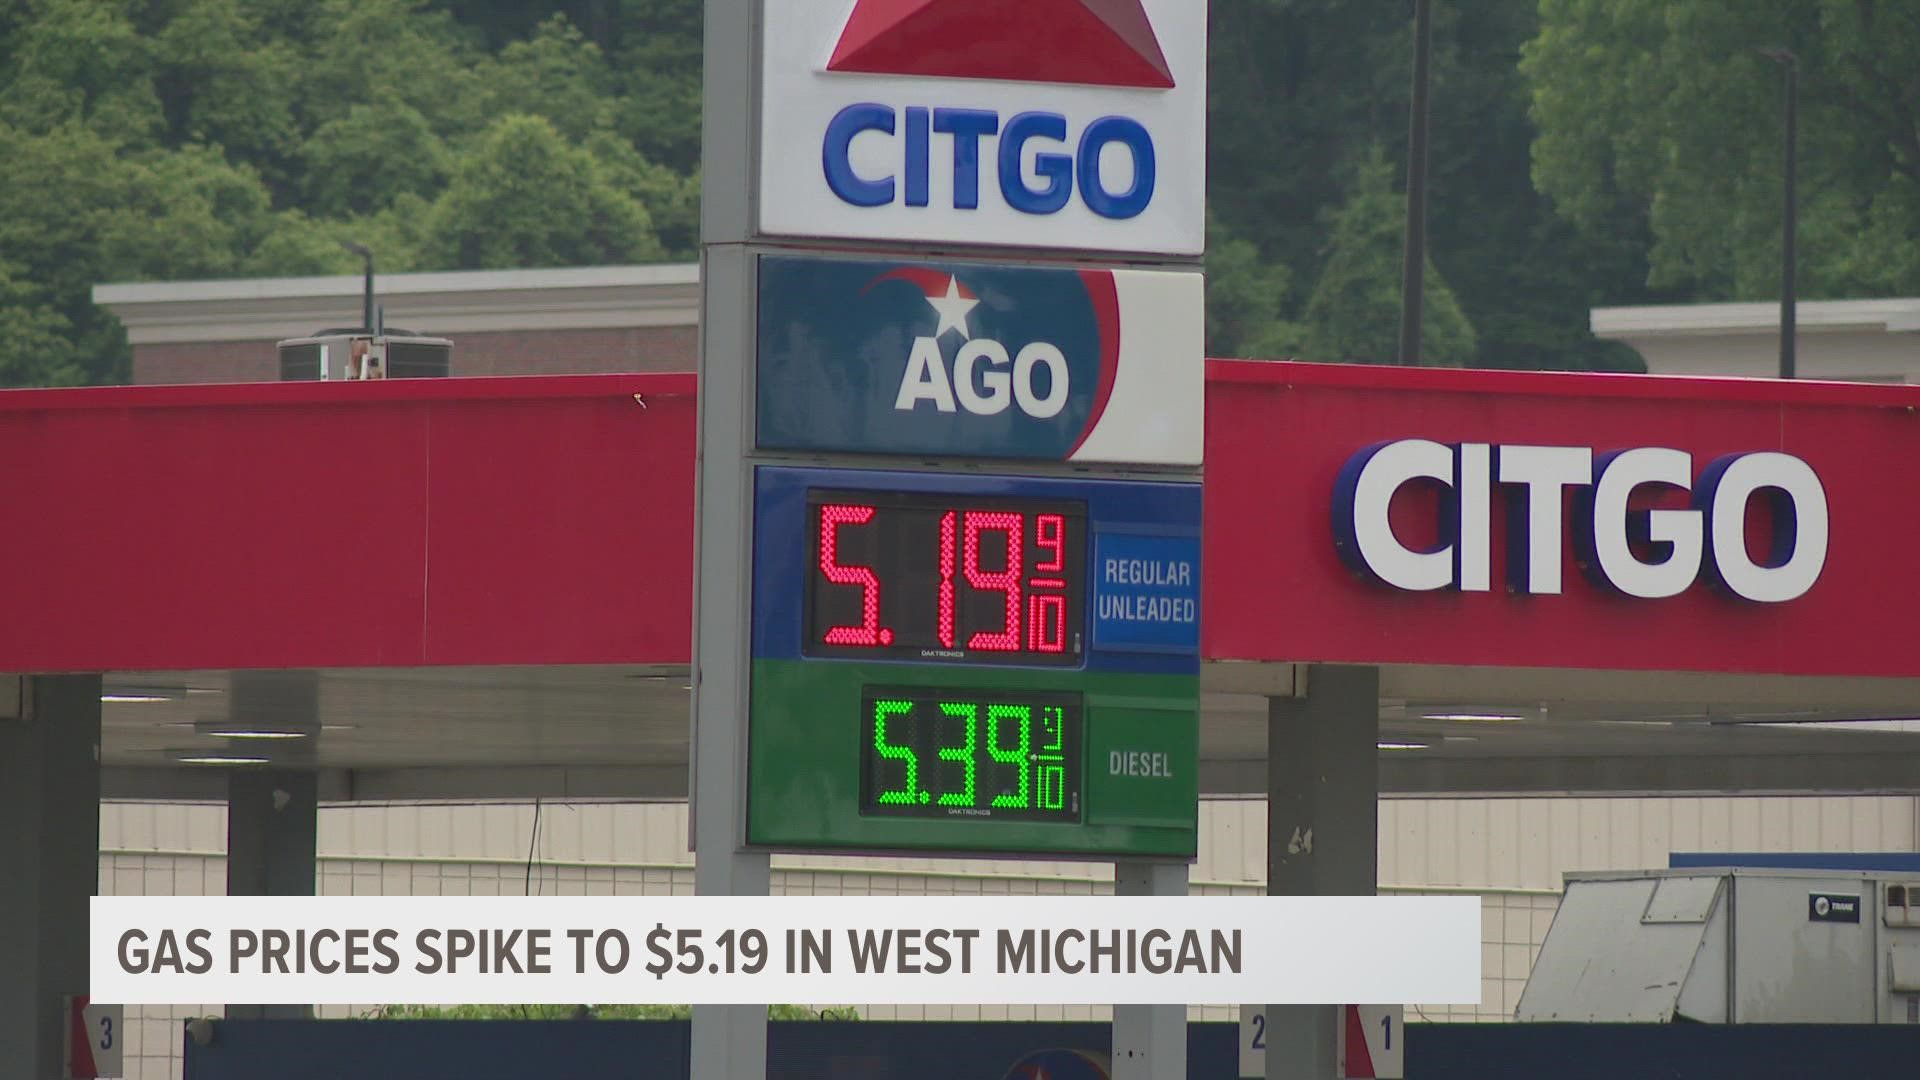 We asked GasBuddy's Patrick DeHann about what we can expect for Michigan's gas prices.